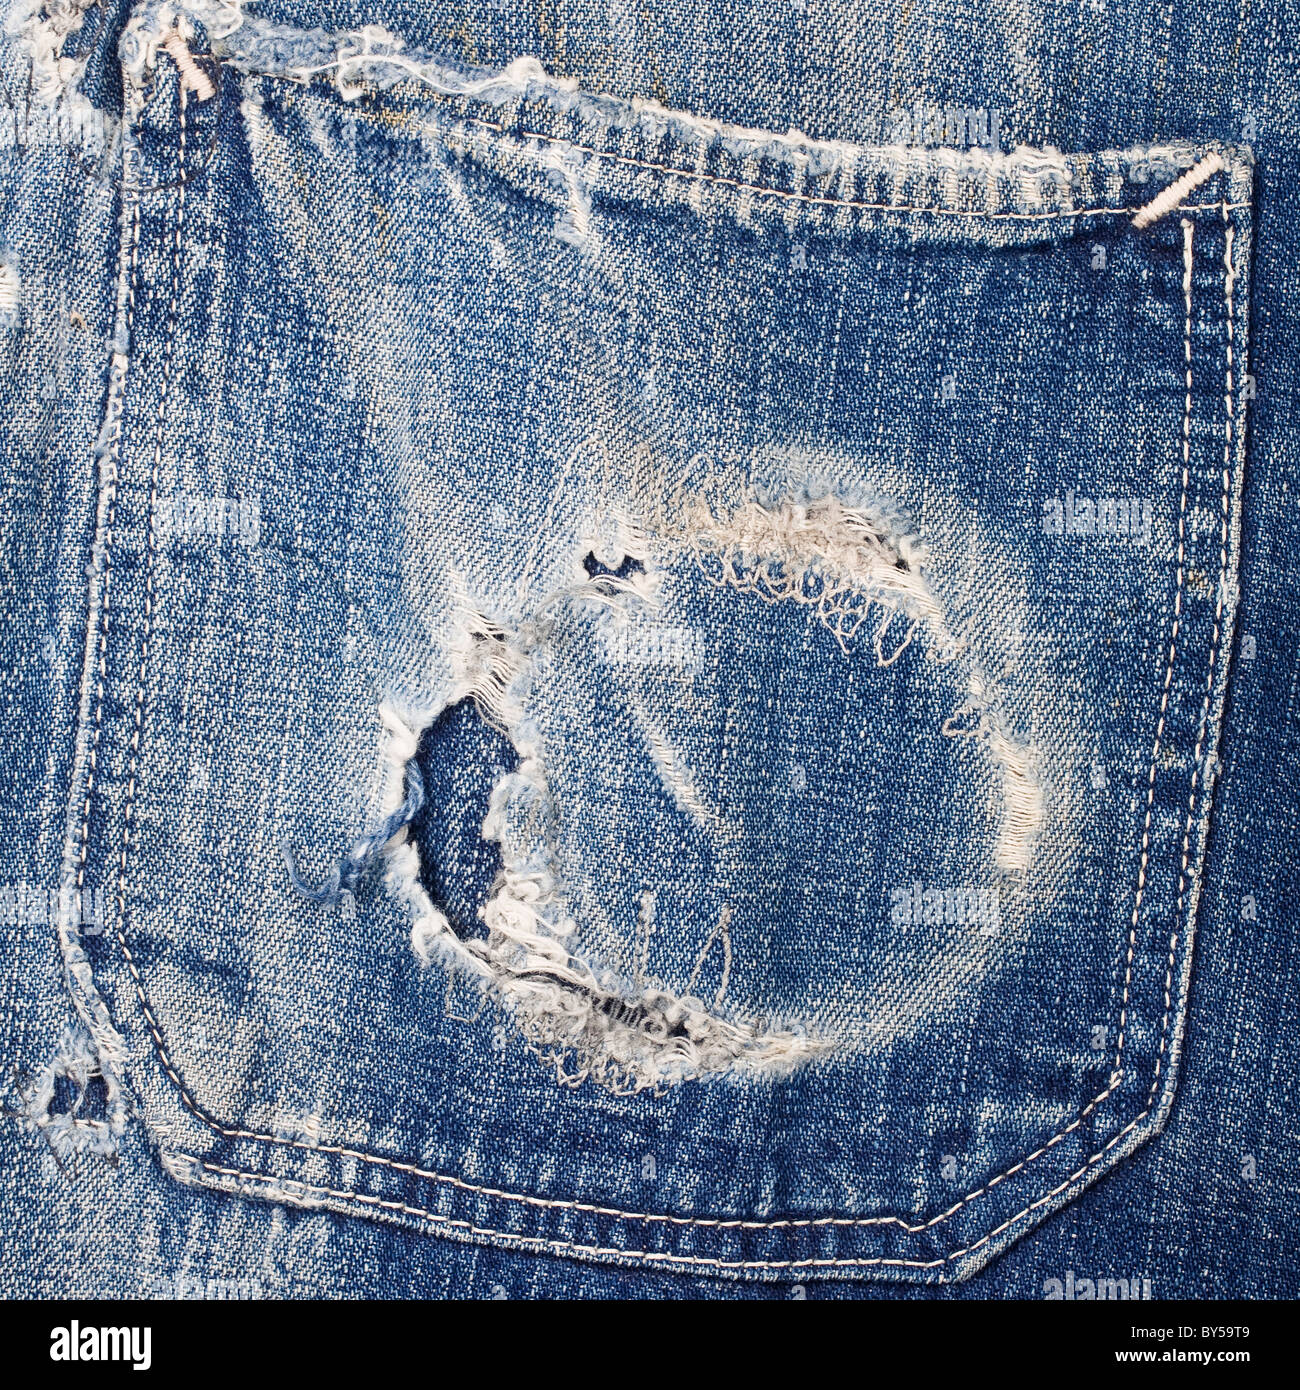 Worn out jean pocket Stock Photo